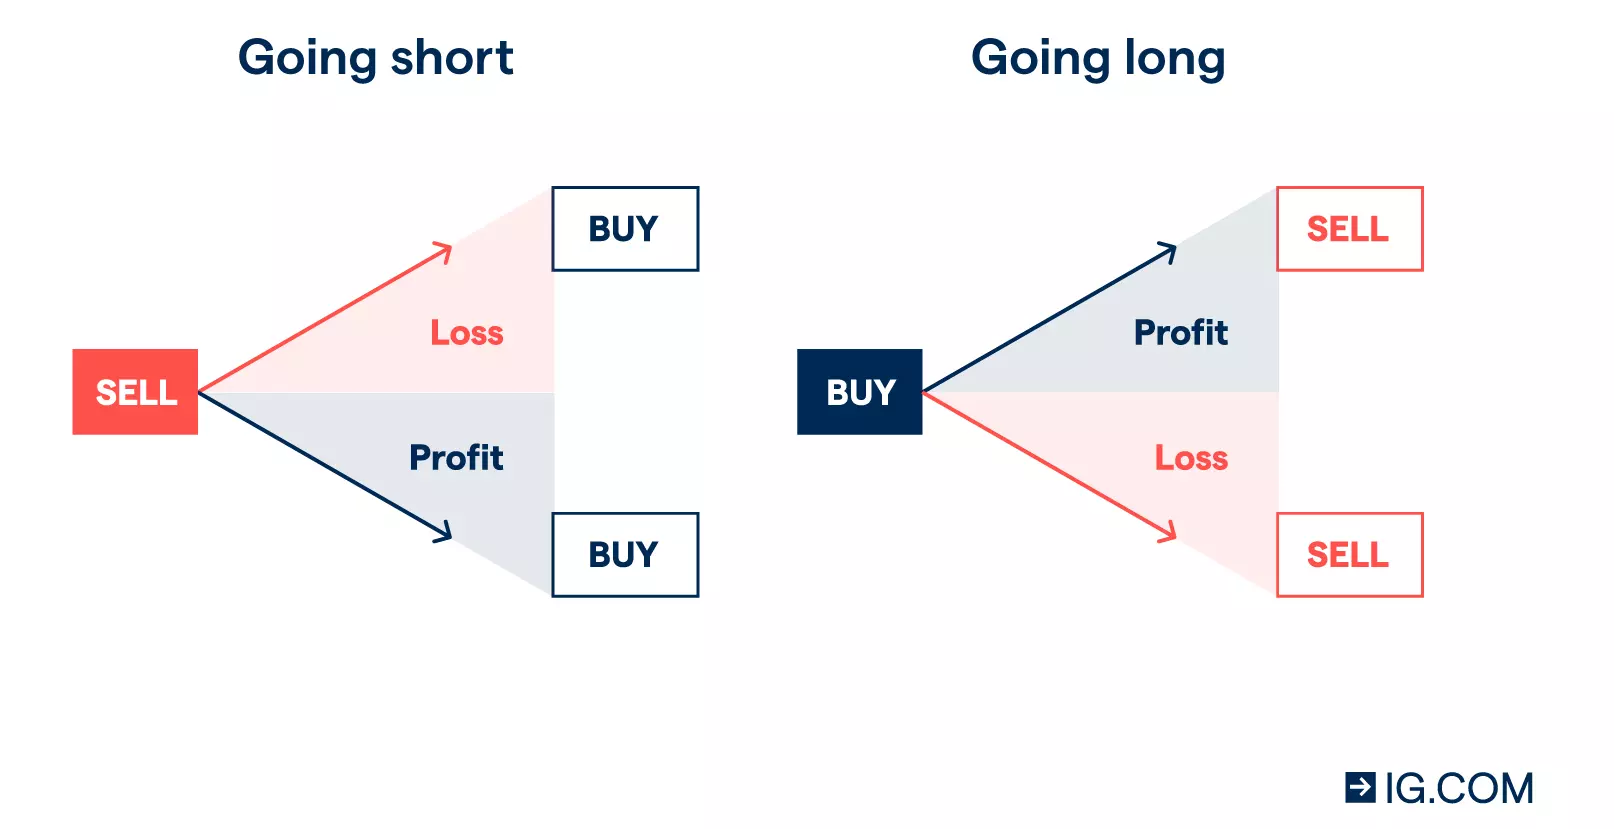 how you can make a loss or profit when going short (‘sell’) versus showing how you can make a profit or loss when going long (‘buy’) an underlying asset